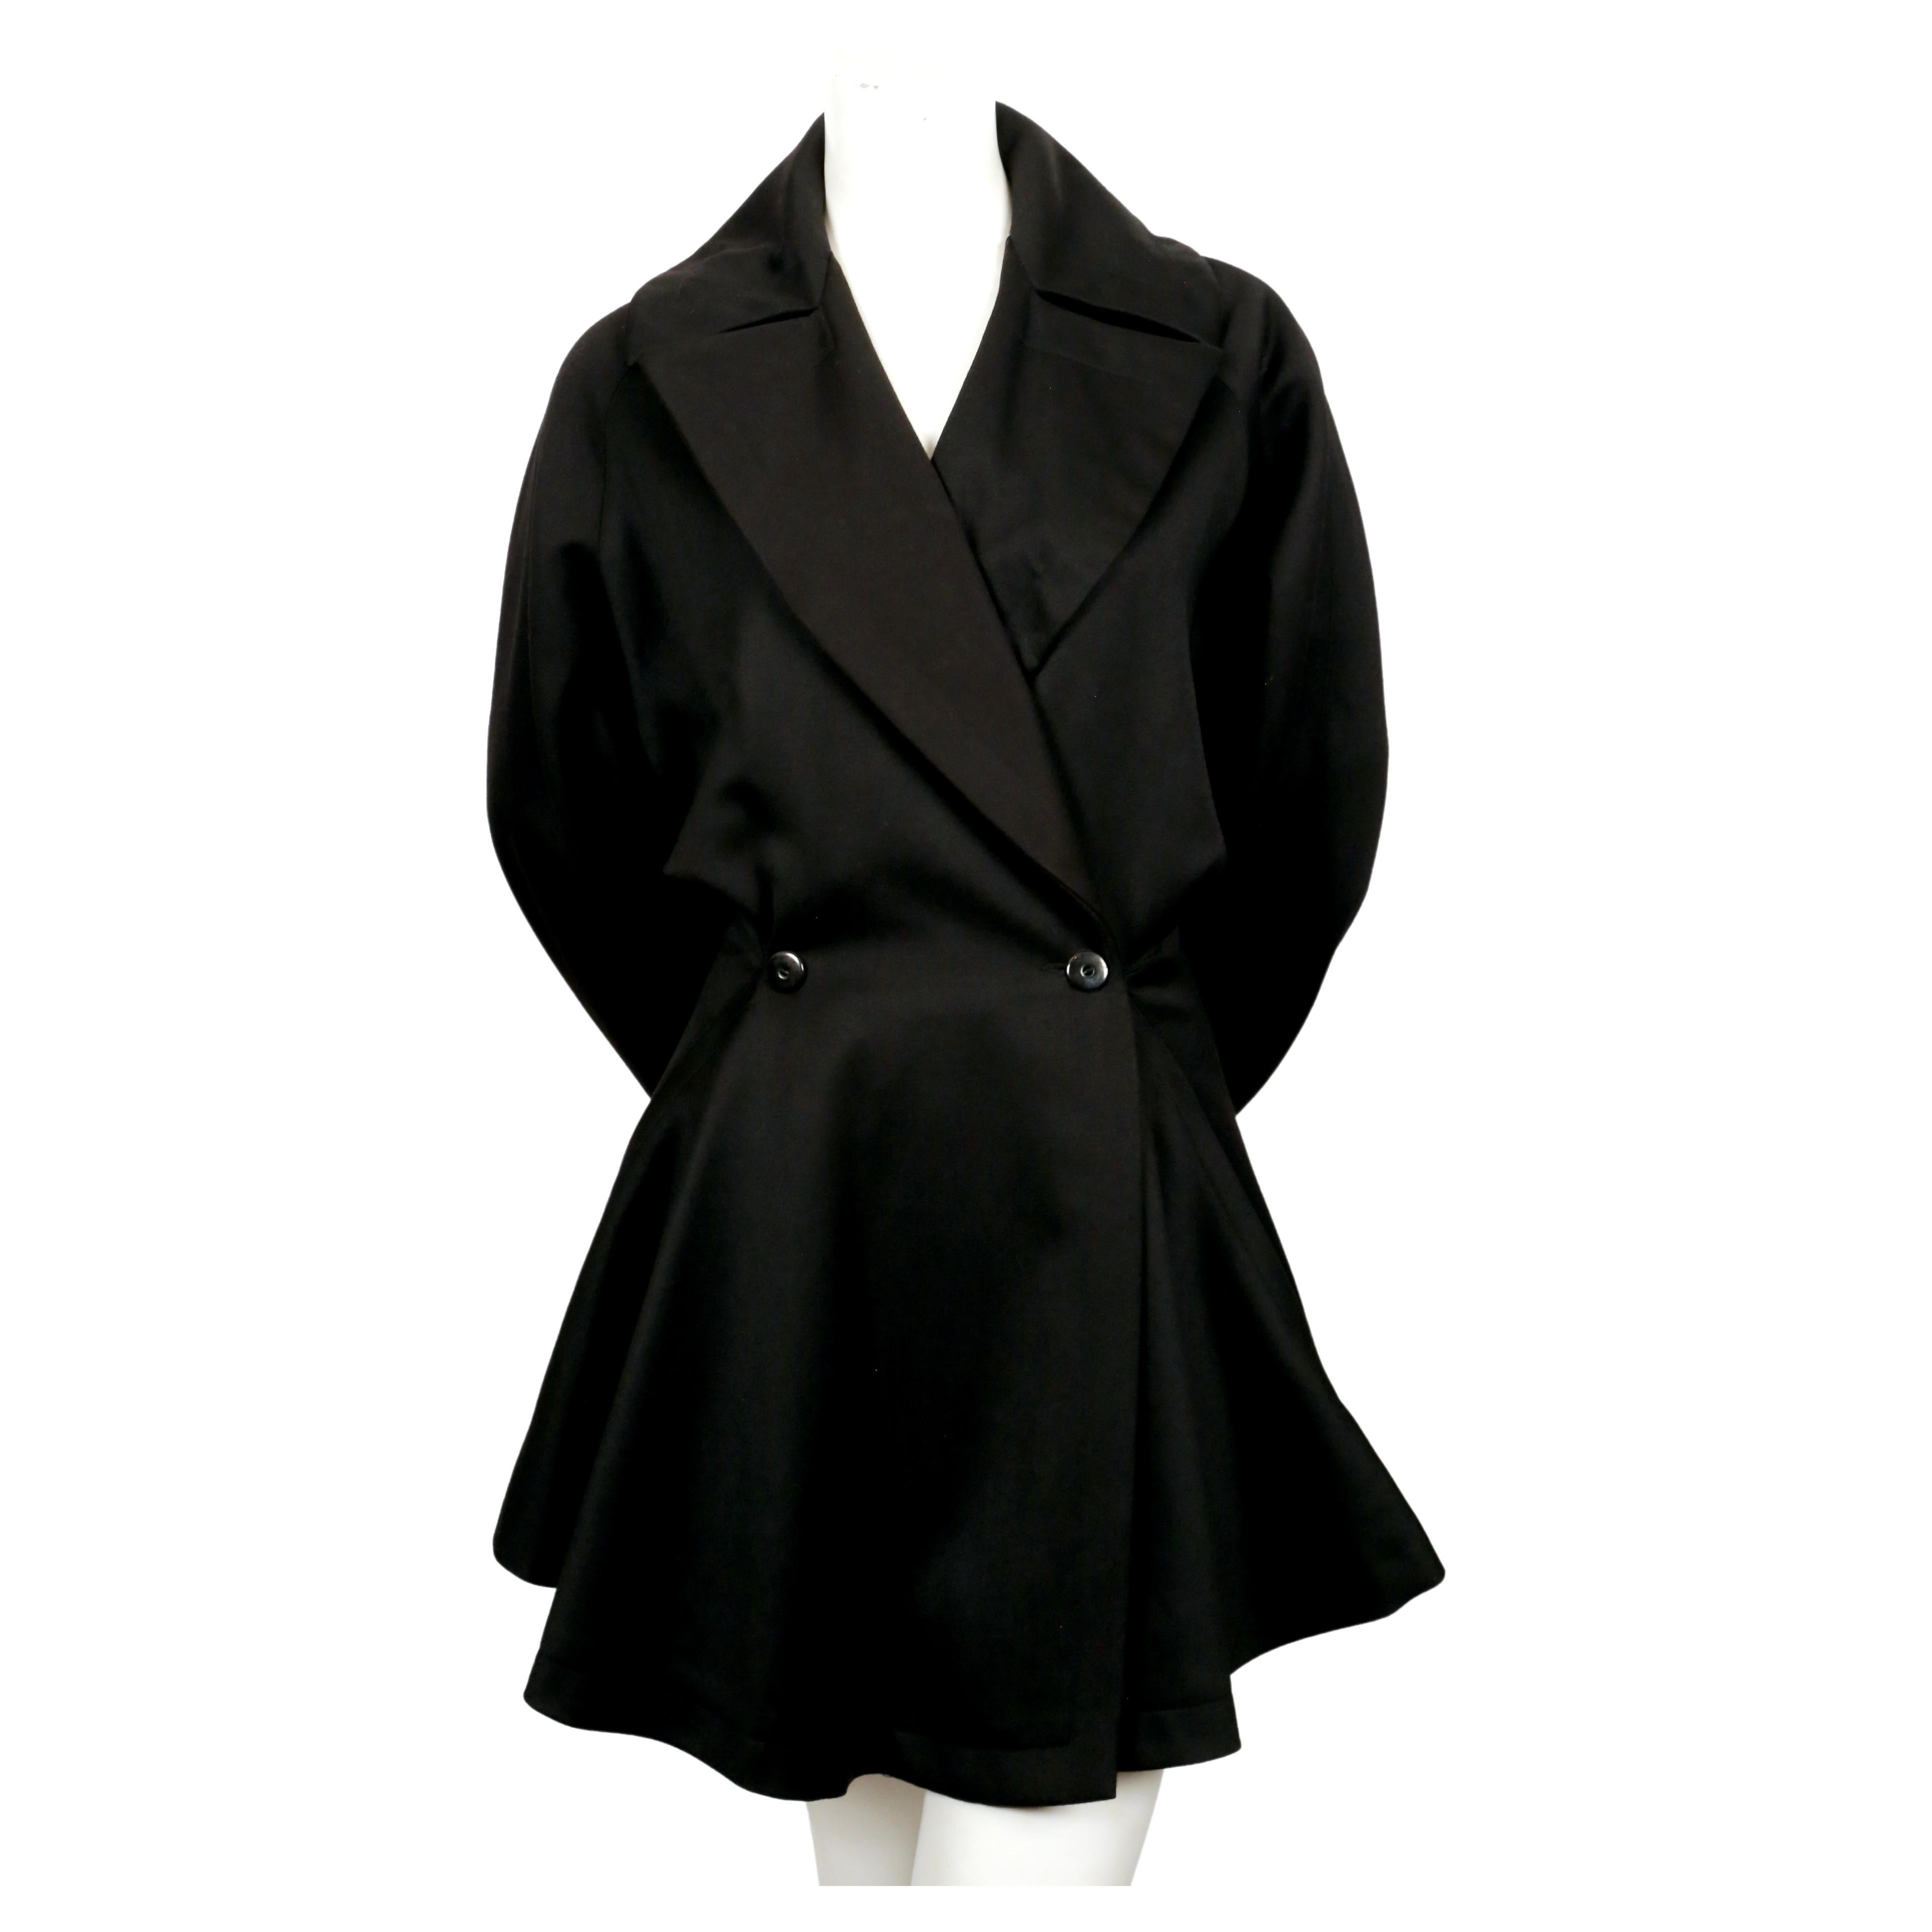 Jet-black, gabardine wool coat with full skirt and uniquely constructed cut out back designed by Azzedine Alaia dating to the late 1980's. Very flattering fit. Coat is labeled a French size 38. Approximate measurements: waist 28-29